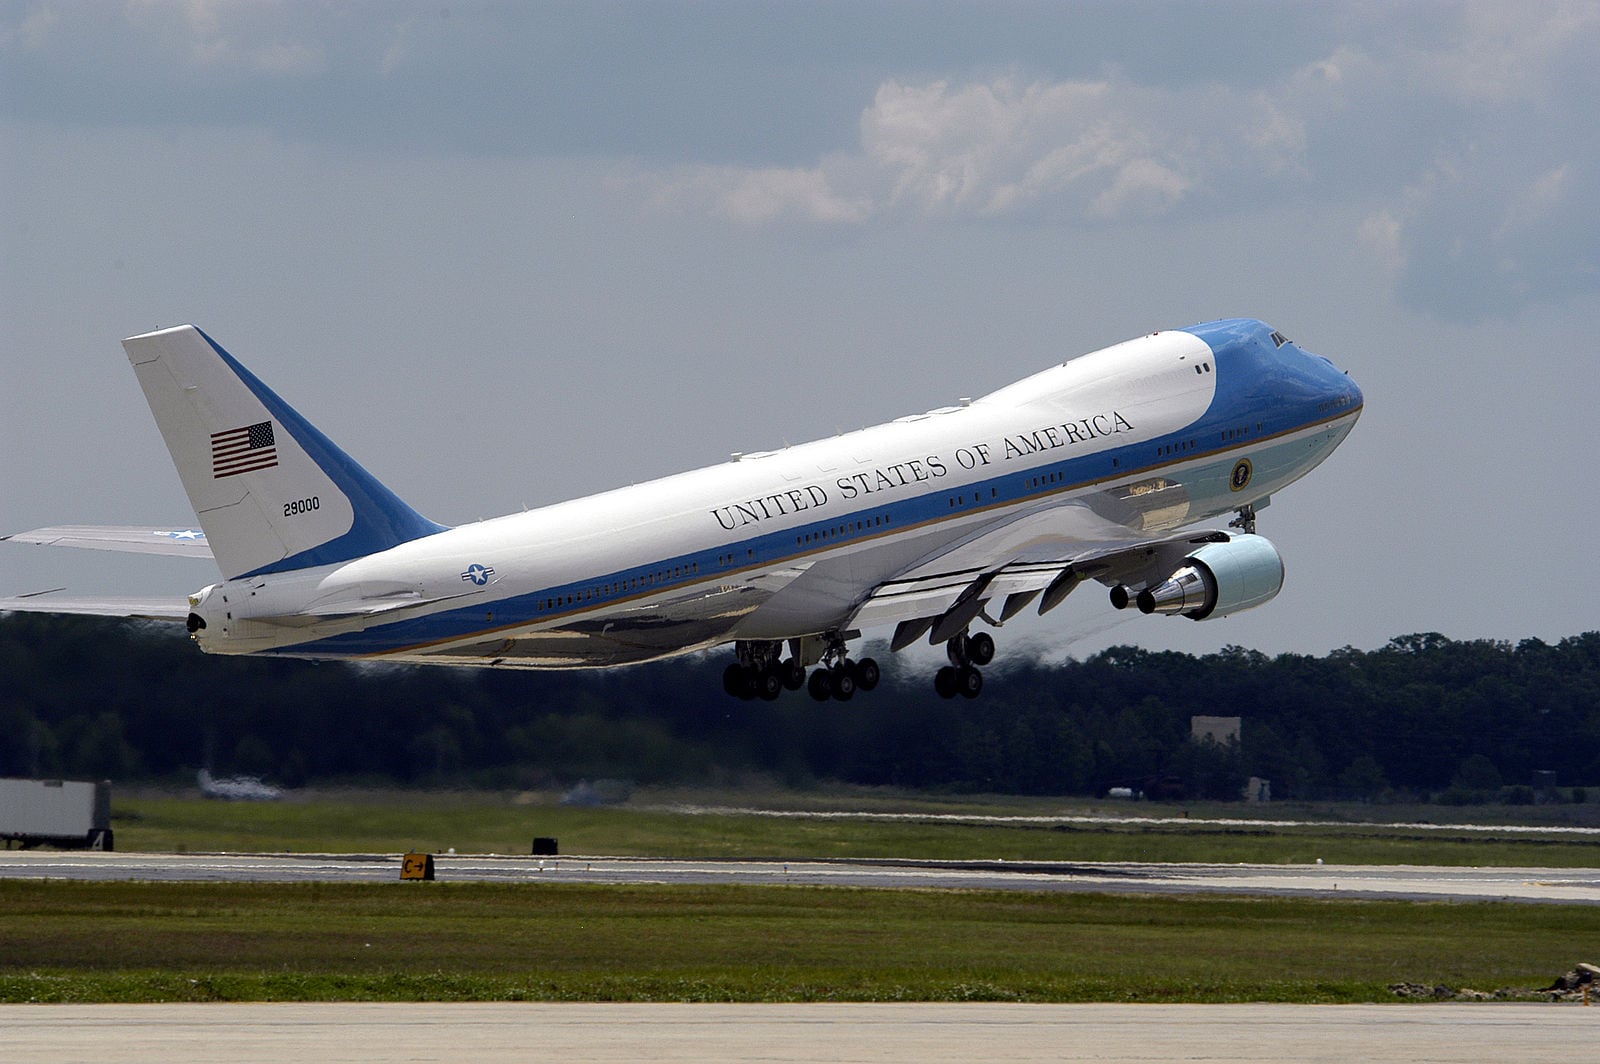 SAM 28000, “Air Force One” when the President is on board, is one of the two VC-25s (747-200s) presidential aircraft. (U.S. Navy photo by Photographer’s Mate 2nd Class Daniel J. McLain)